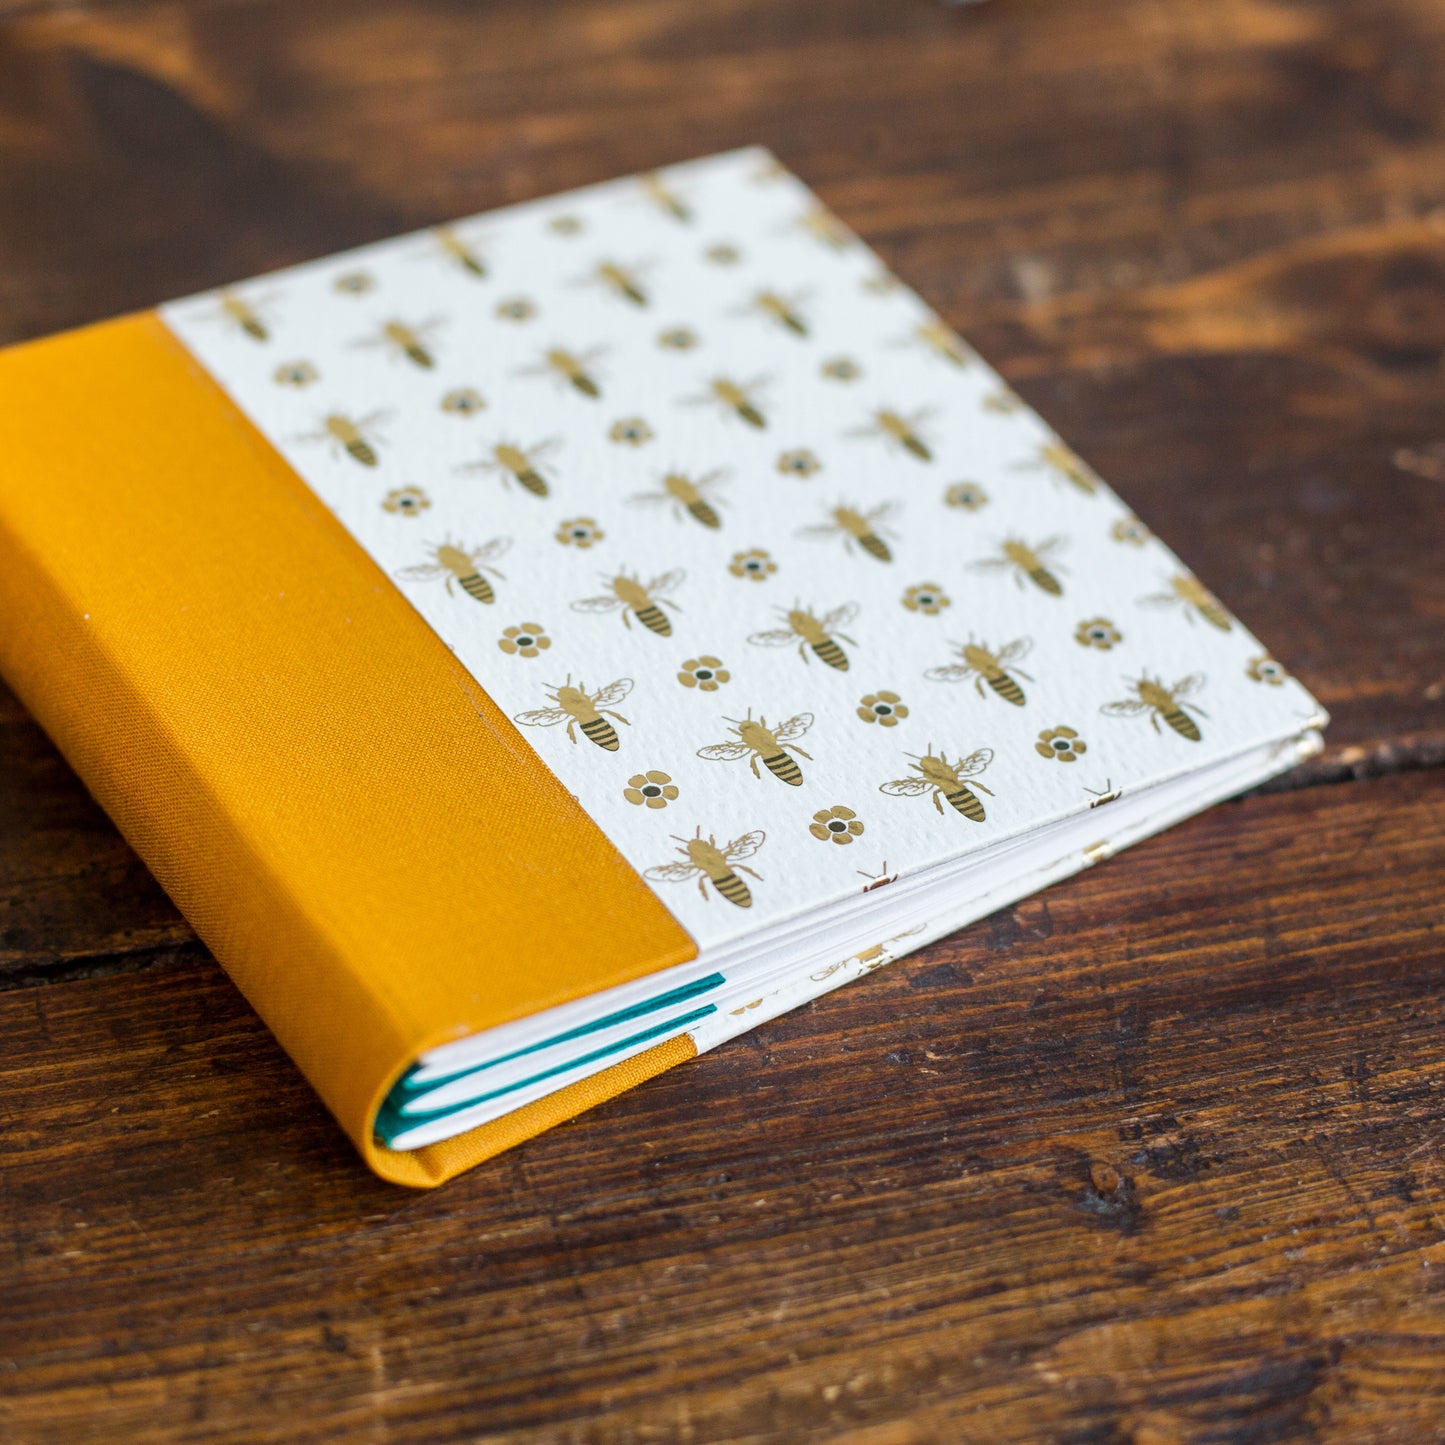 Introduction to Bookbinding